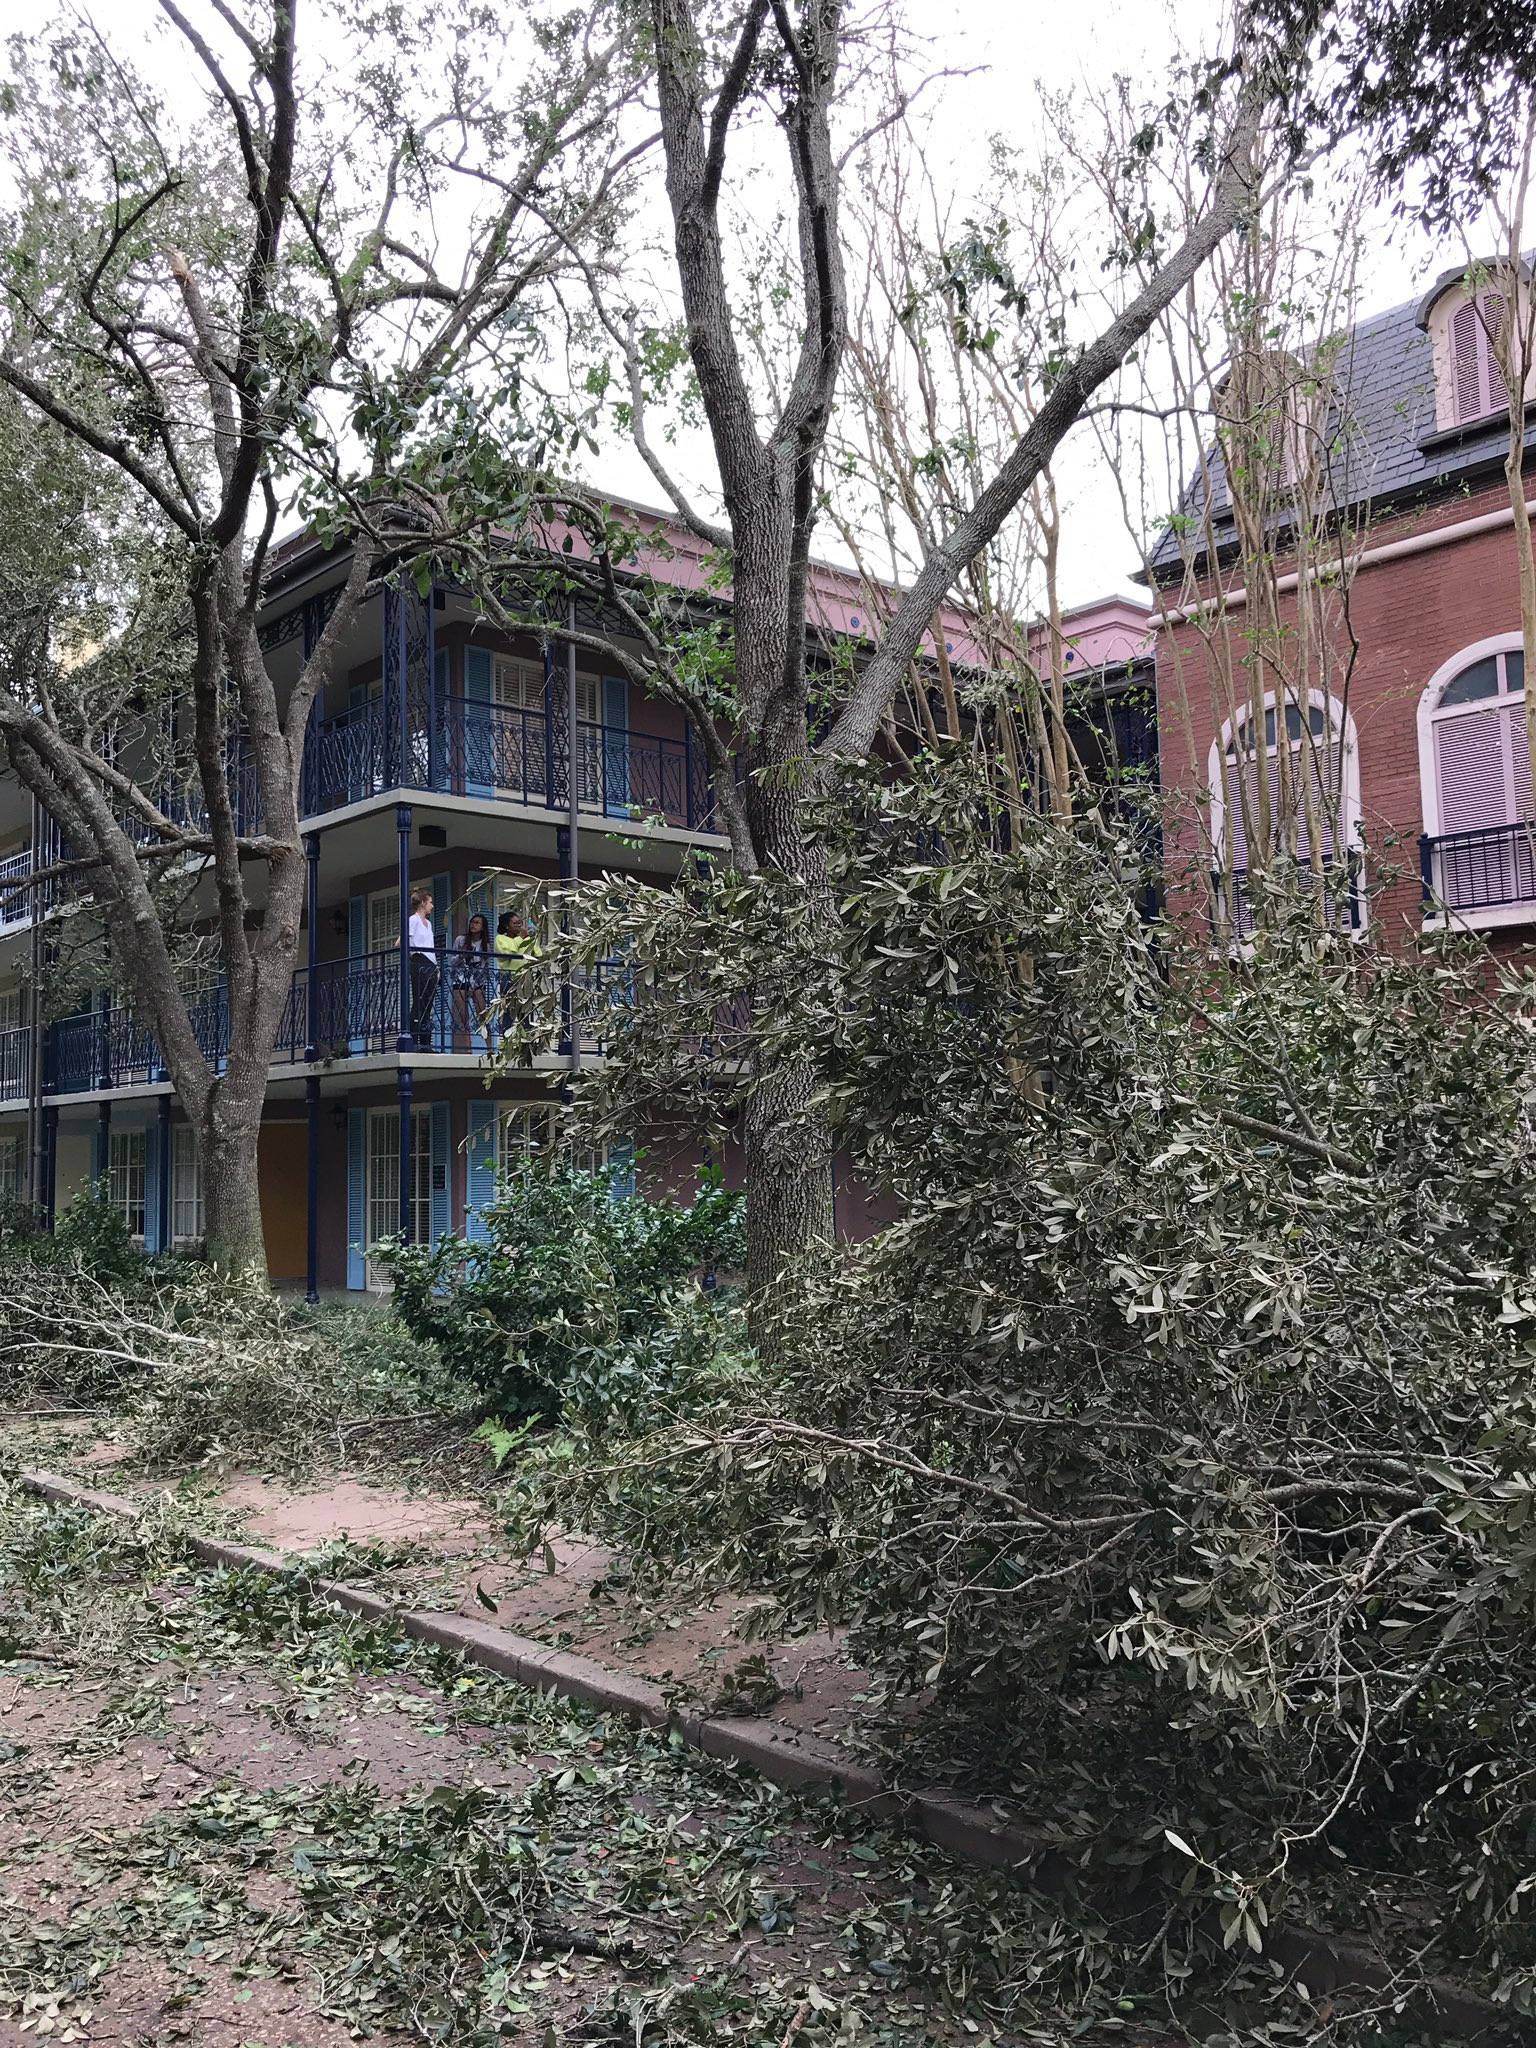 PHOTOS - Trees uprooted at Disney's Port Orleans Resort from Hurricane Irma